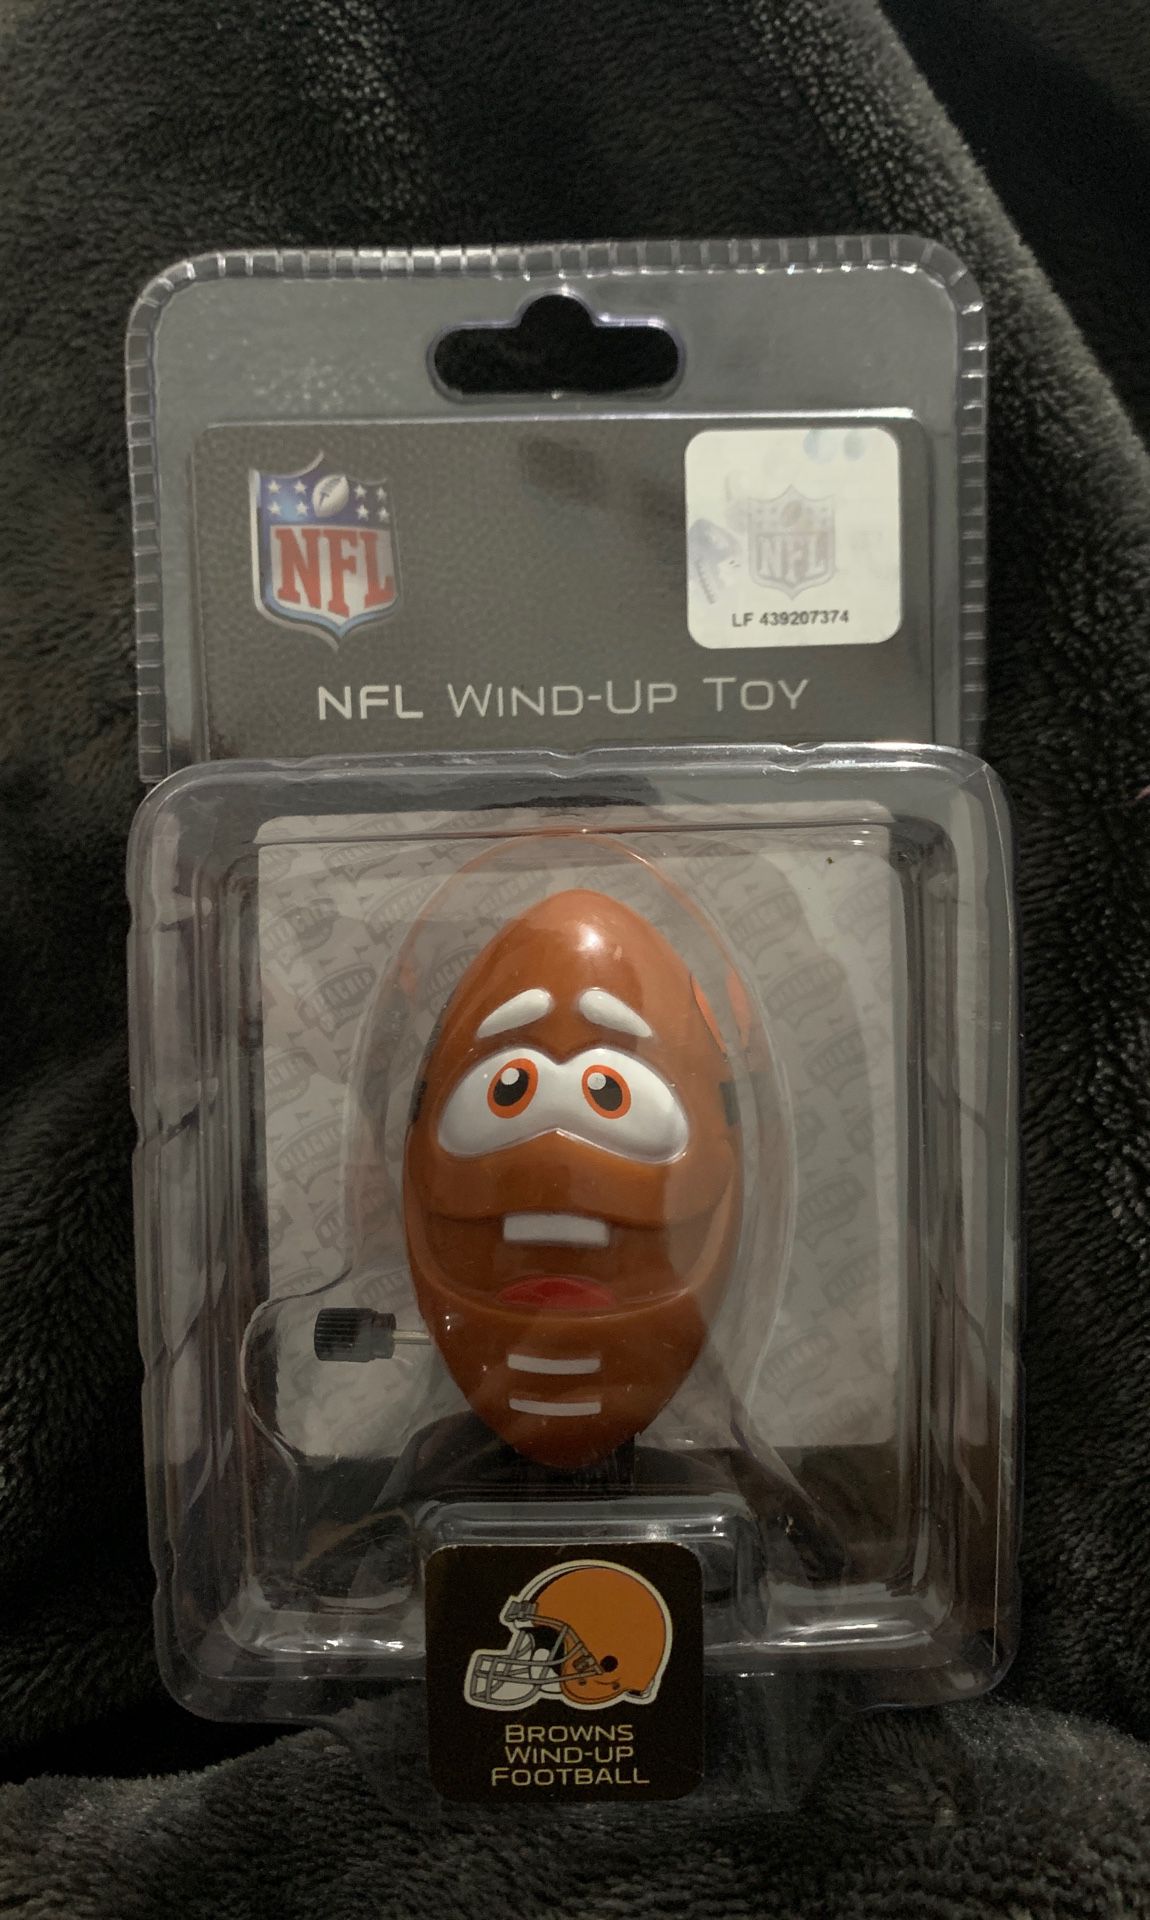 NFL WIND-up toy